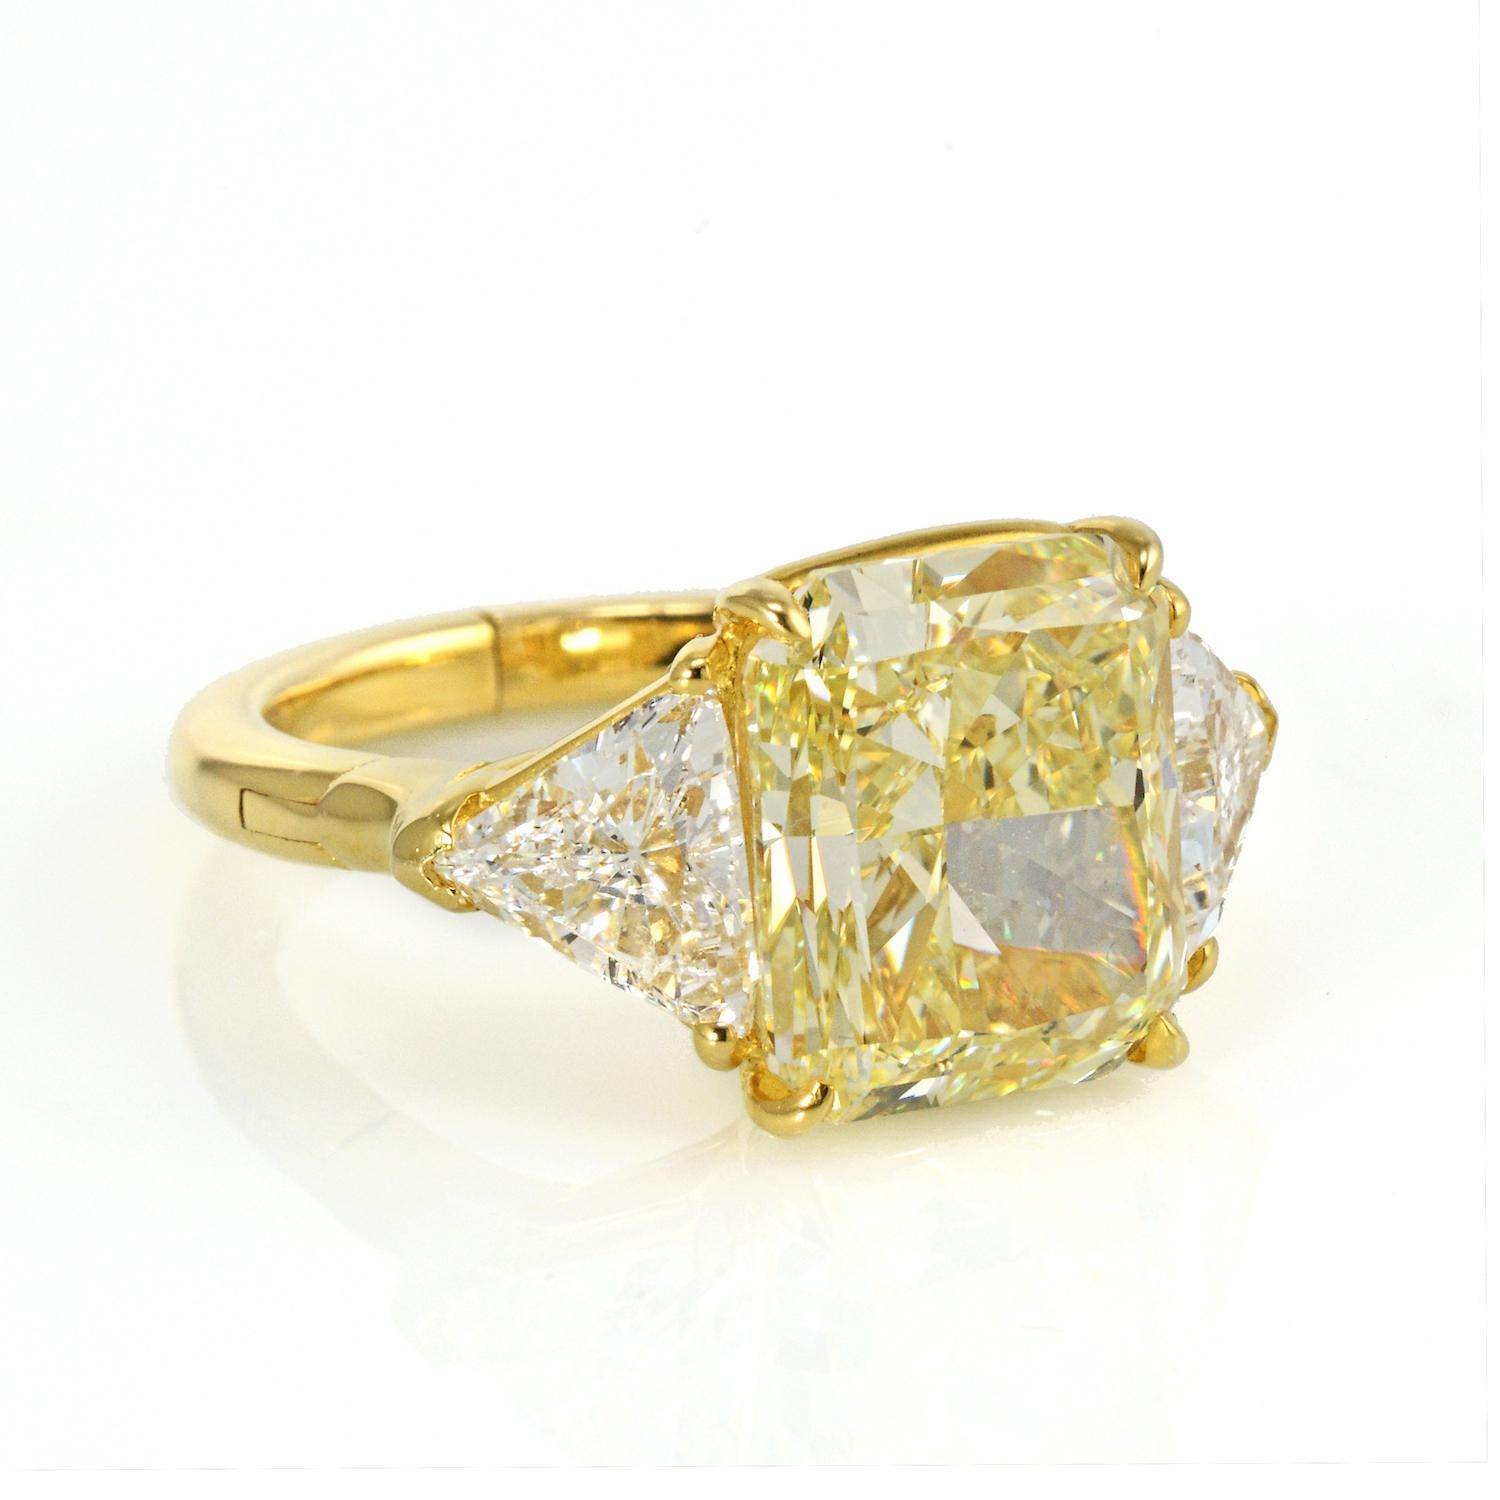 This 6.76 ct natural color Radiant Cut Fancy Yellow Diamond (VVS2) is flanked by 2 colorless Trillion Cut Diamonds, all set together in a beautiful three stone diamond engagement ring. Crafted in 18K Yellow Gold together three diamonds make a really